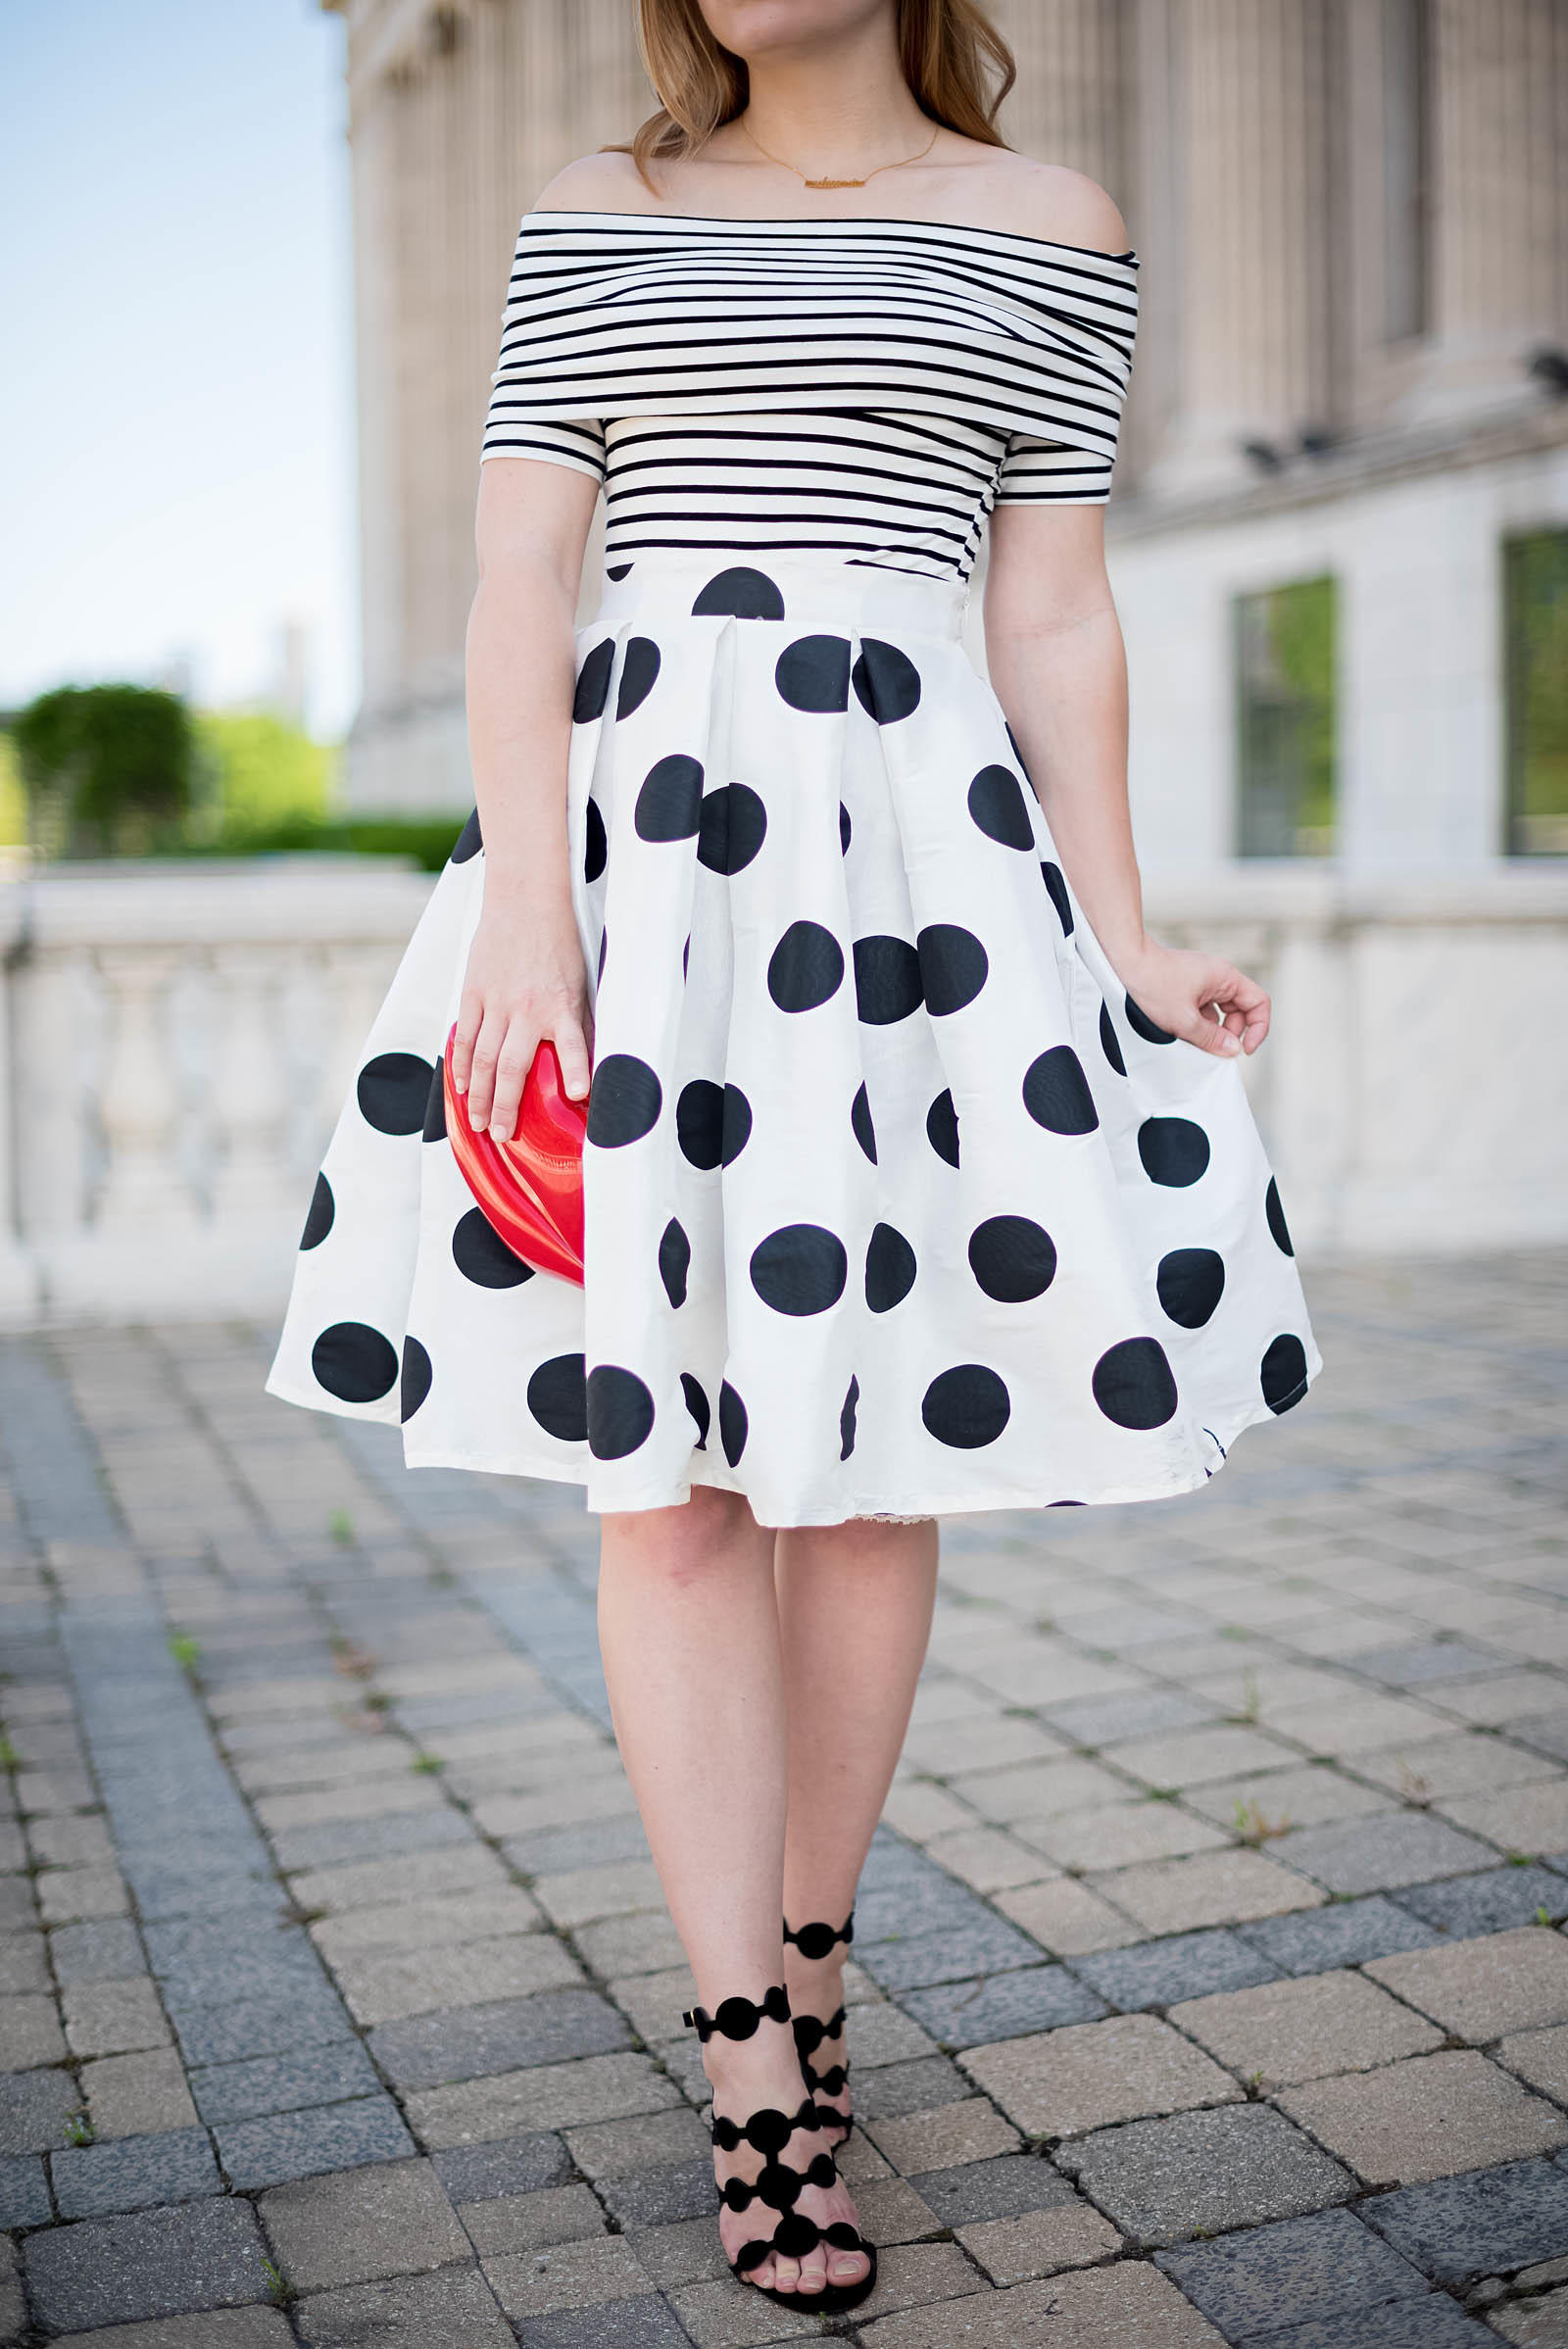 Stripes Polka Dots Chic French Summer Outfit